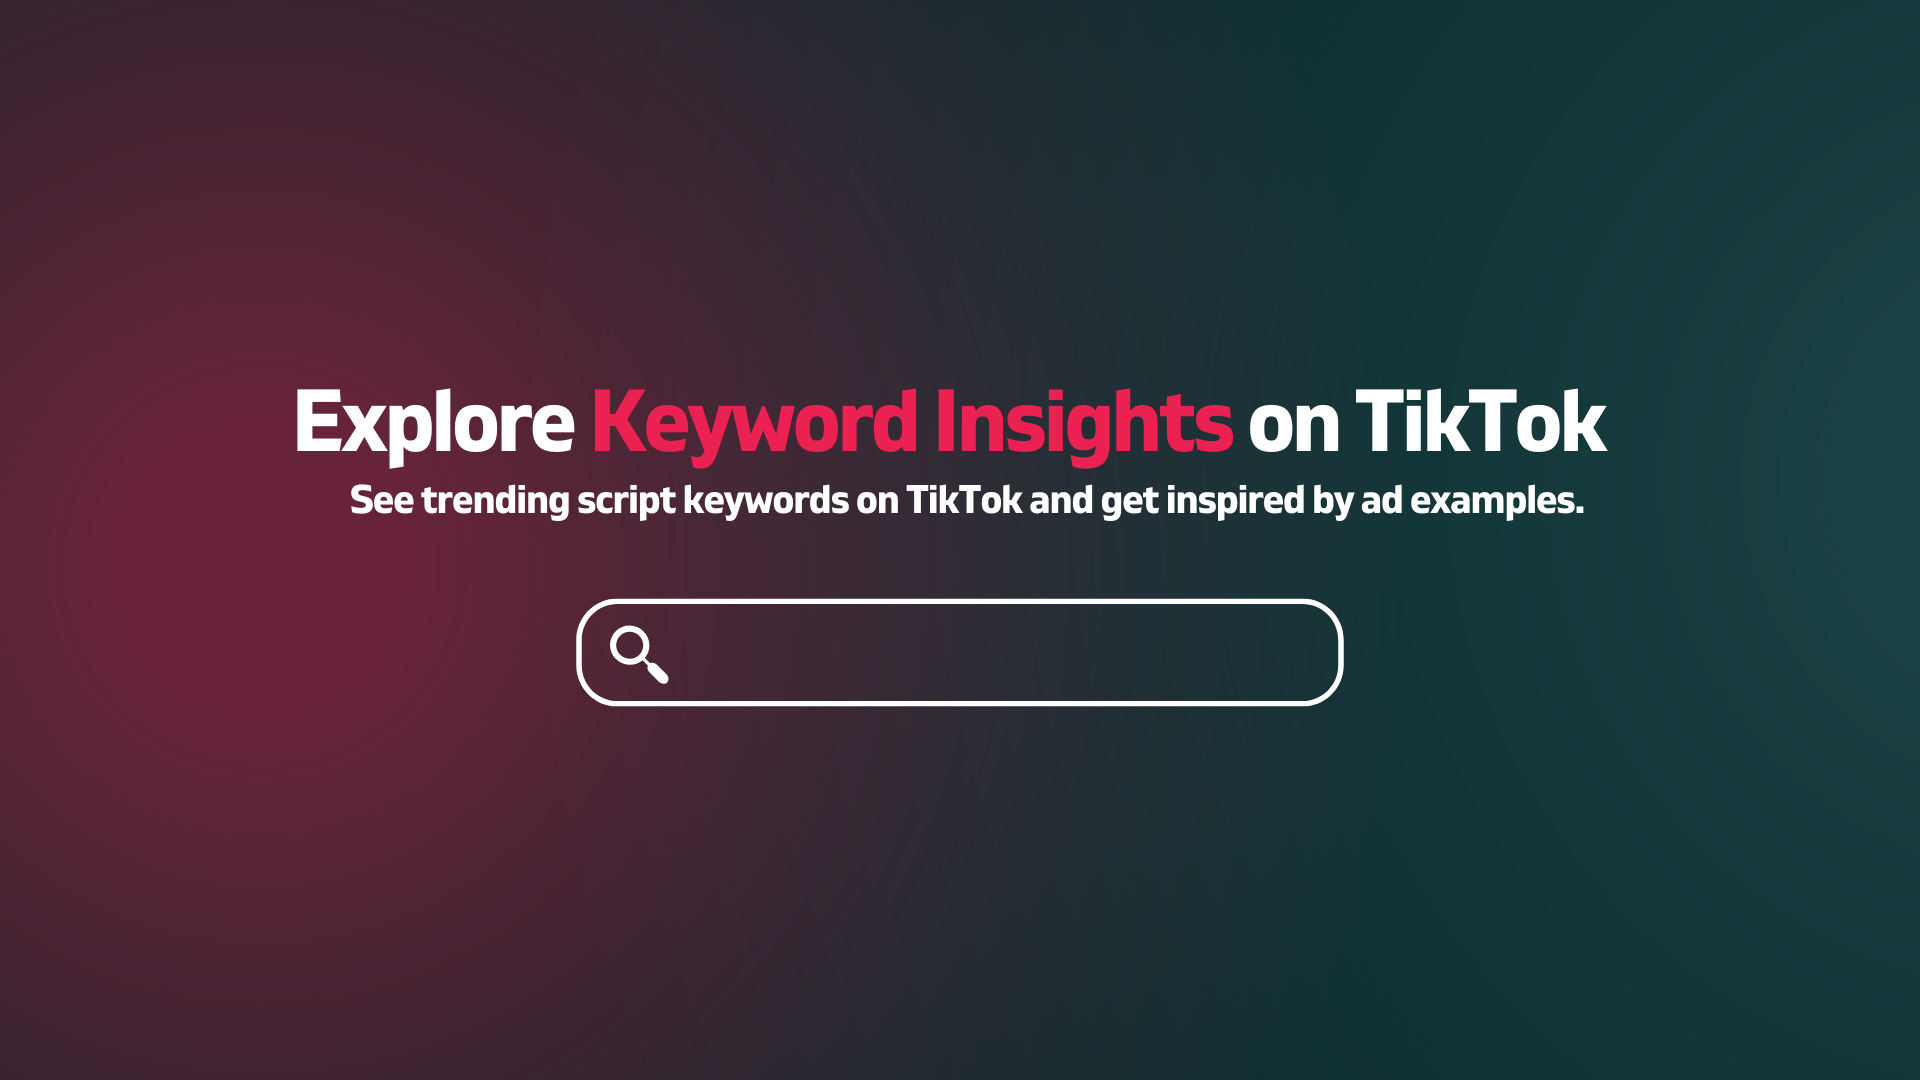 scripts for project new world｜TikTok Search